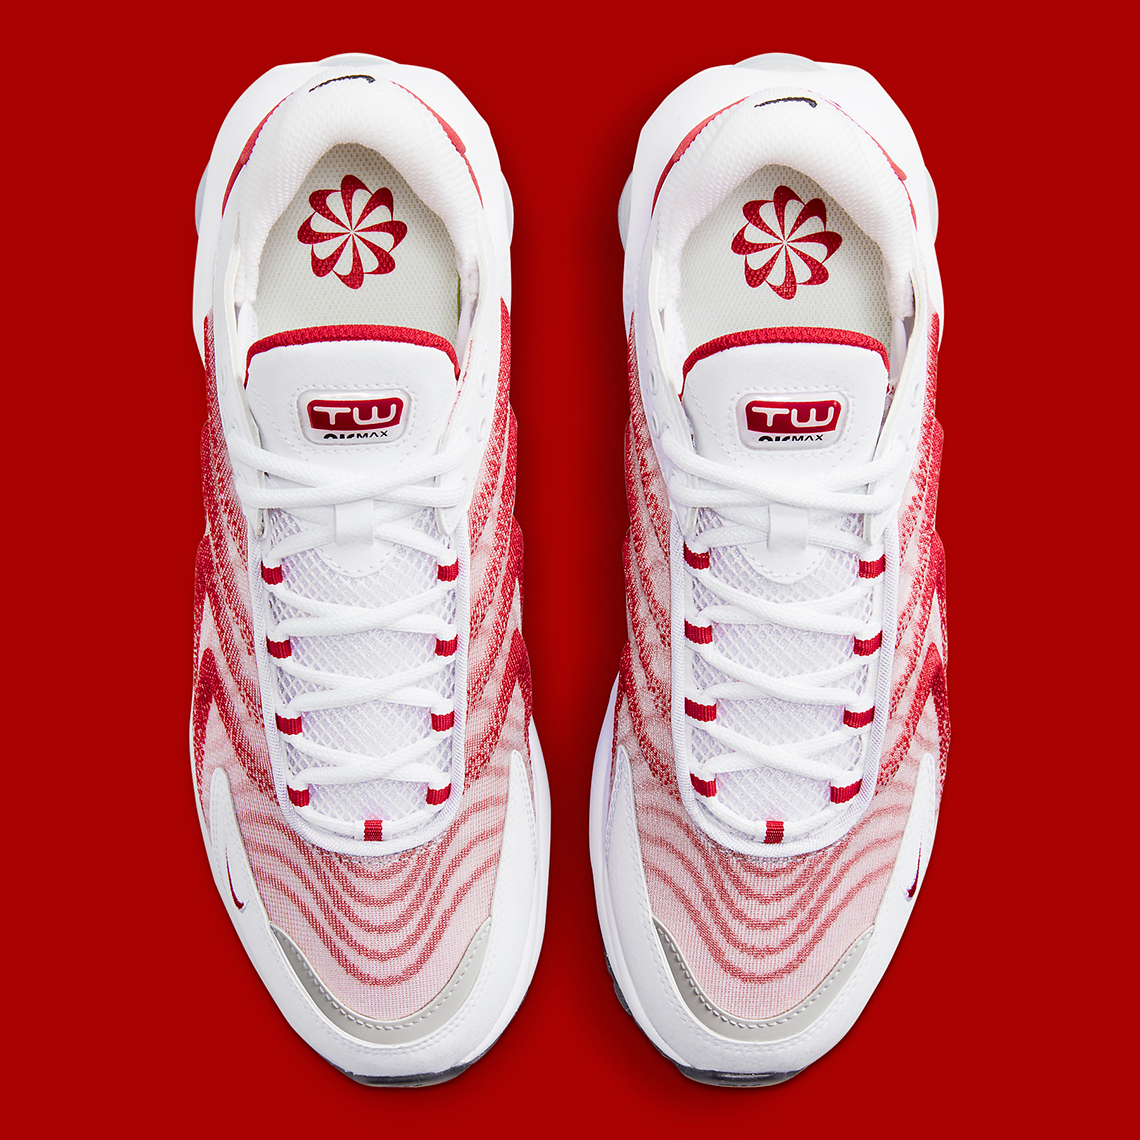 nike air max tw white red dq3984 104 7